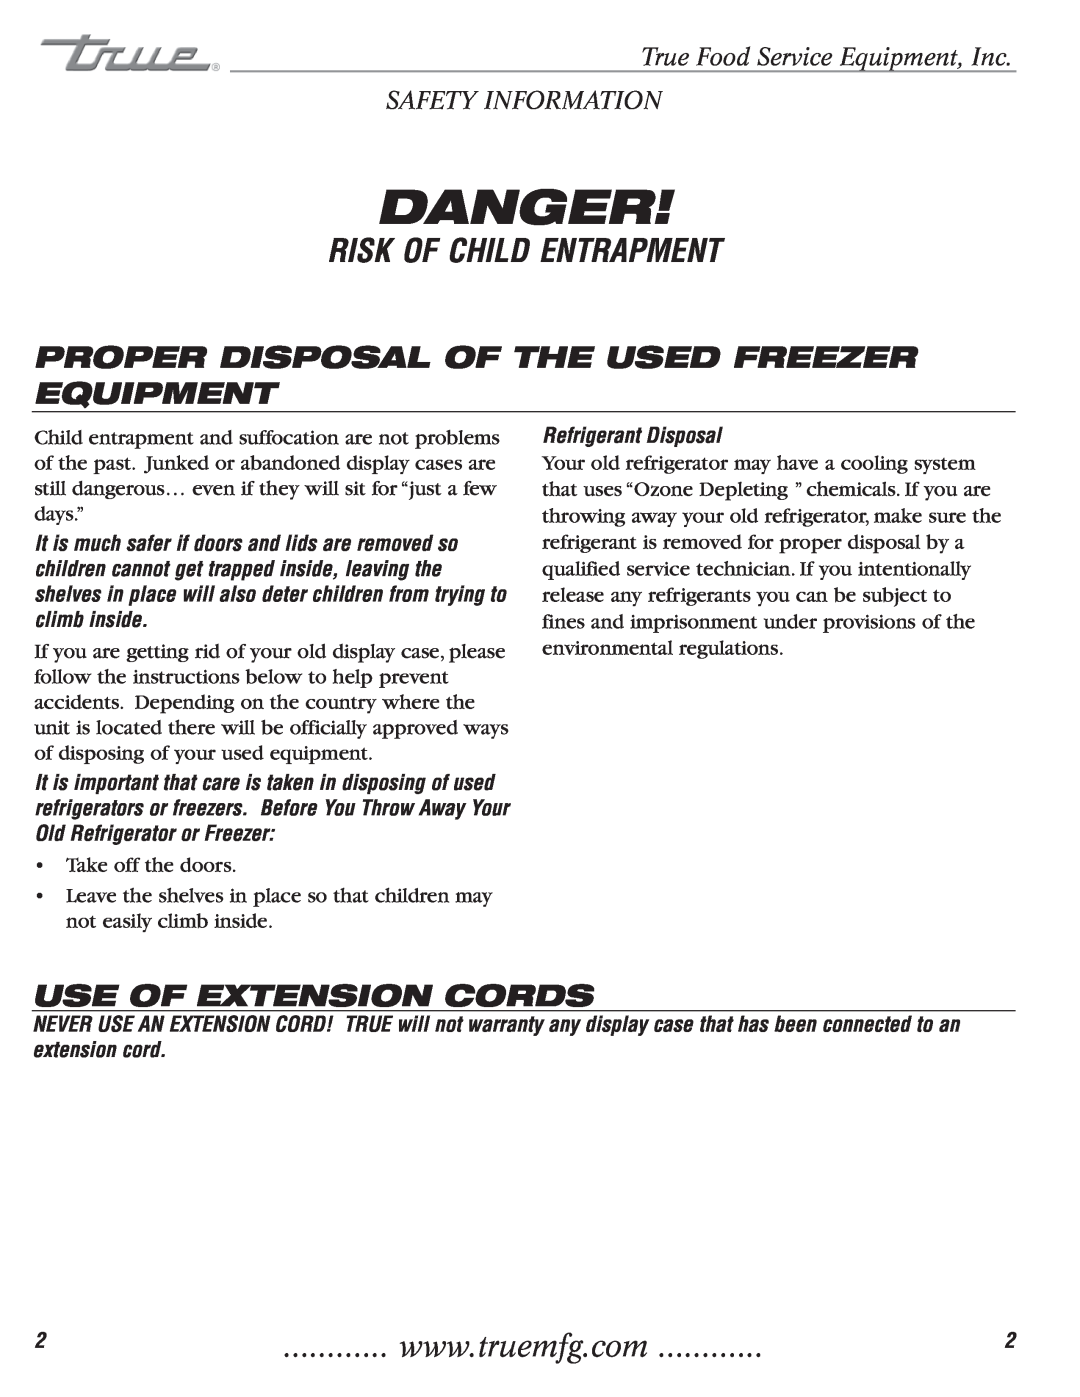 True Manufacturing Company 922341 Risk Of Child Entrapment, Proper Disposal Of The Used Freezer Equipment, Danger 